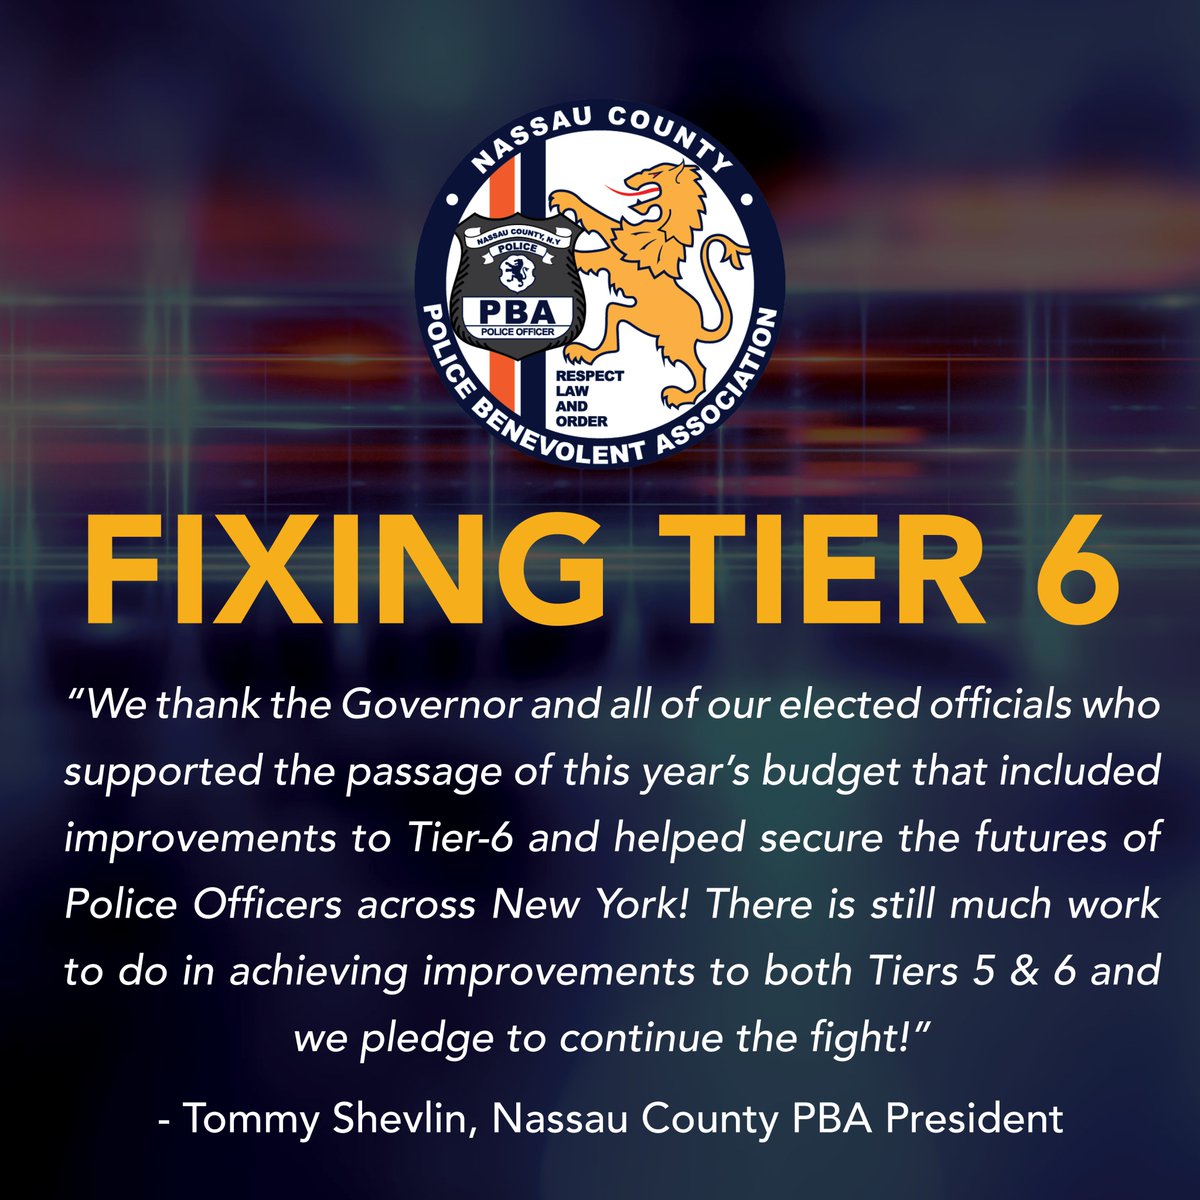 The budget debate in Albany has finally concluded and we are thankful that our voices were heard, and Tier-6 issues are finally being recognized and addressed but this is just the beginning of Tier-6 reform and we pledge to continue the fight!